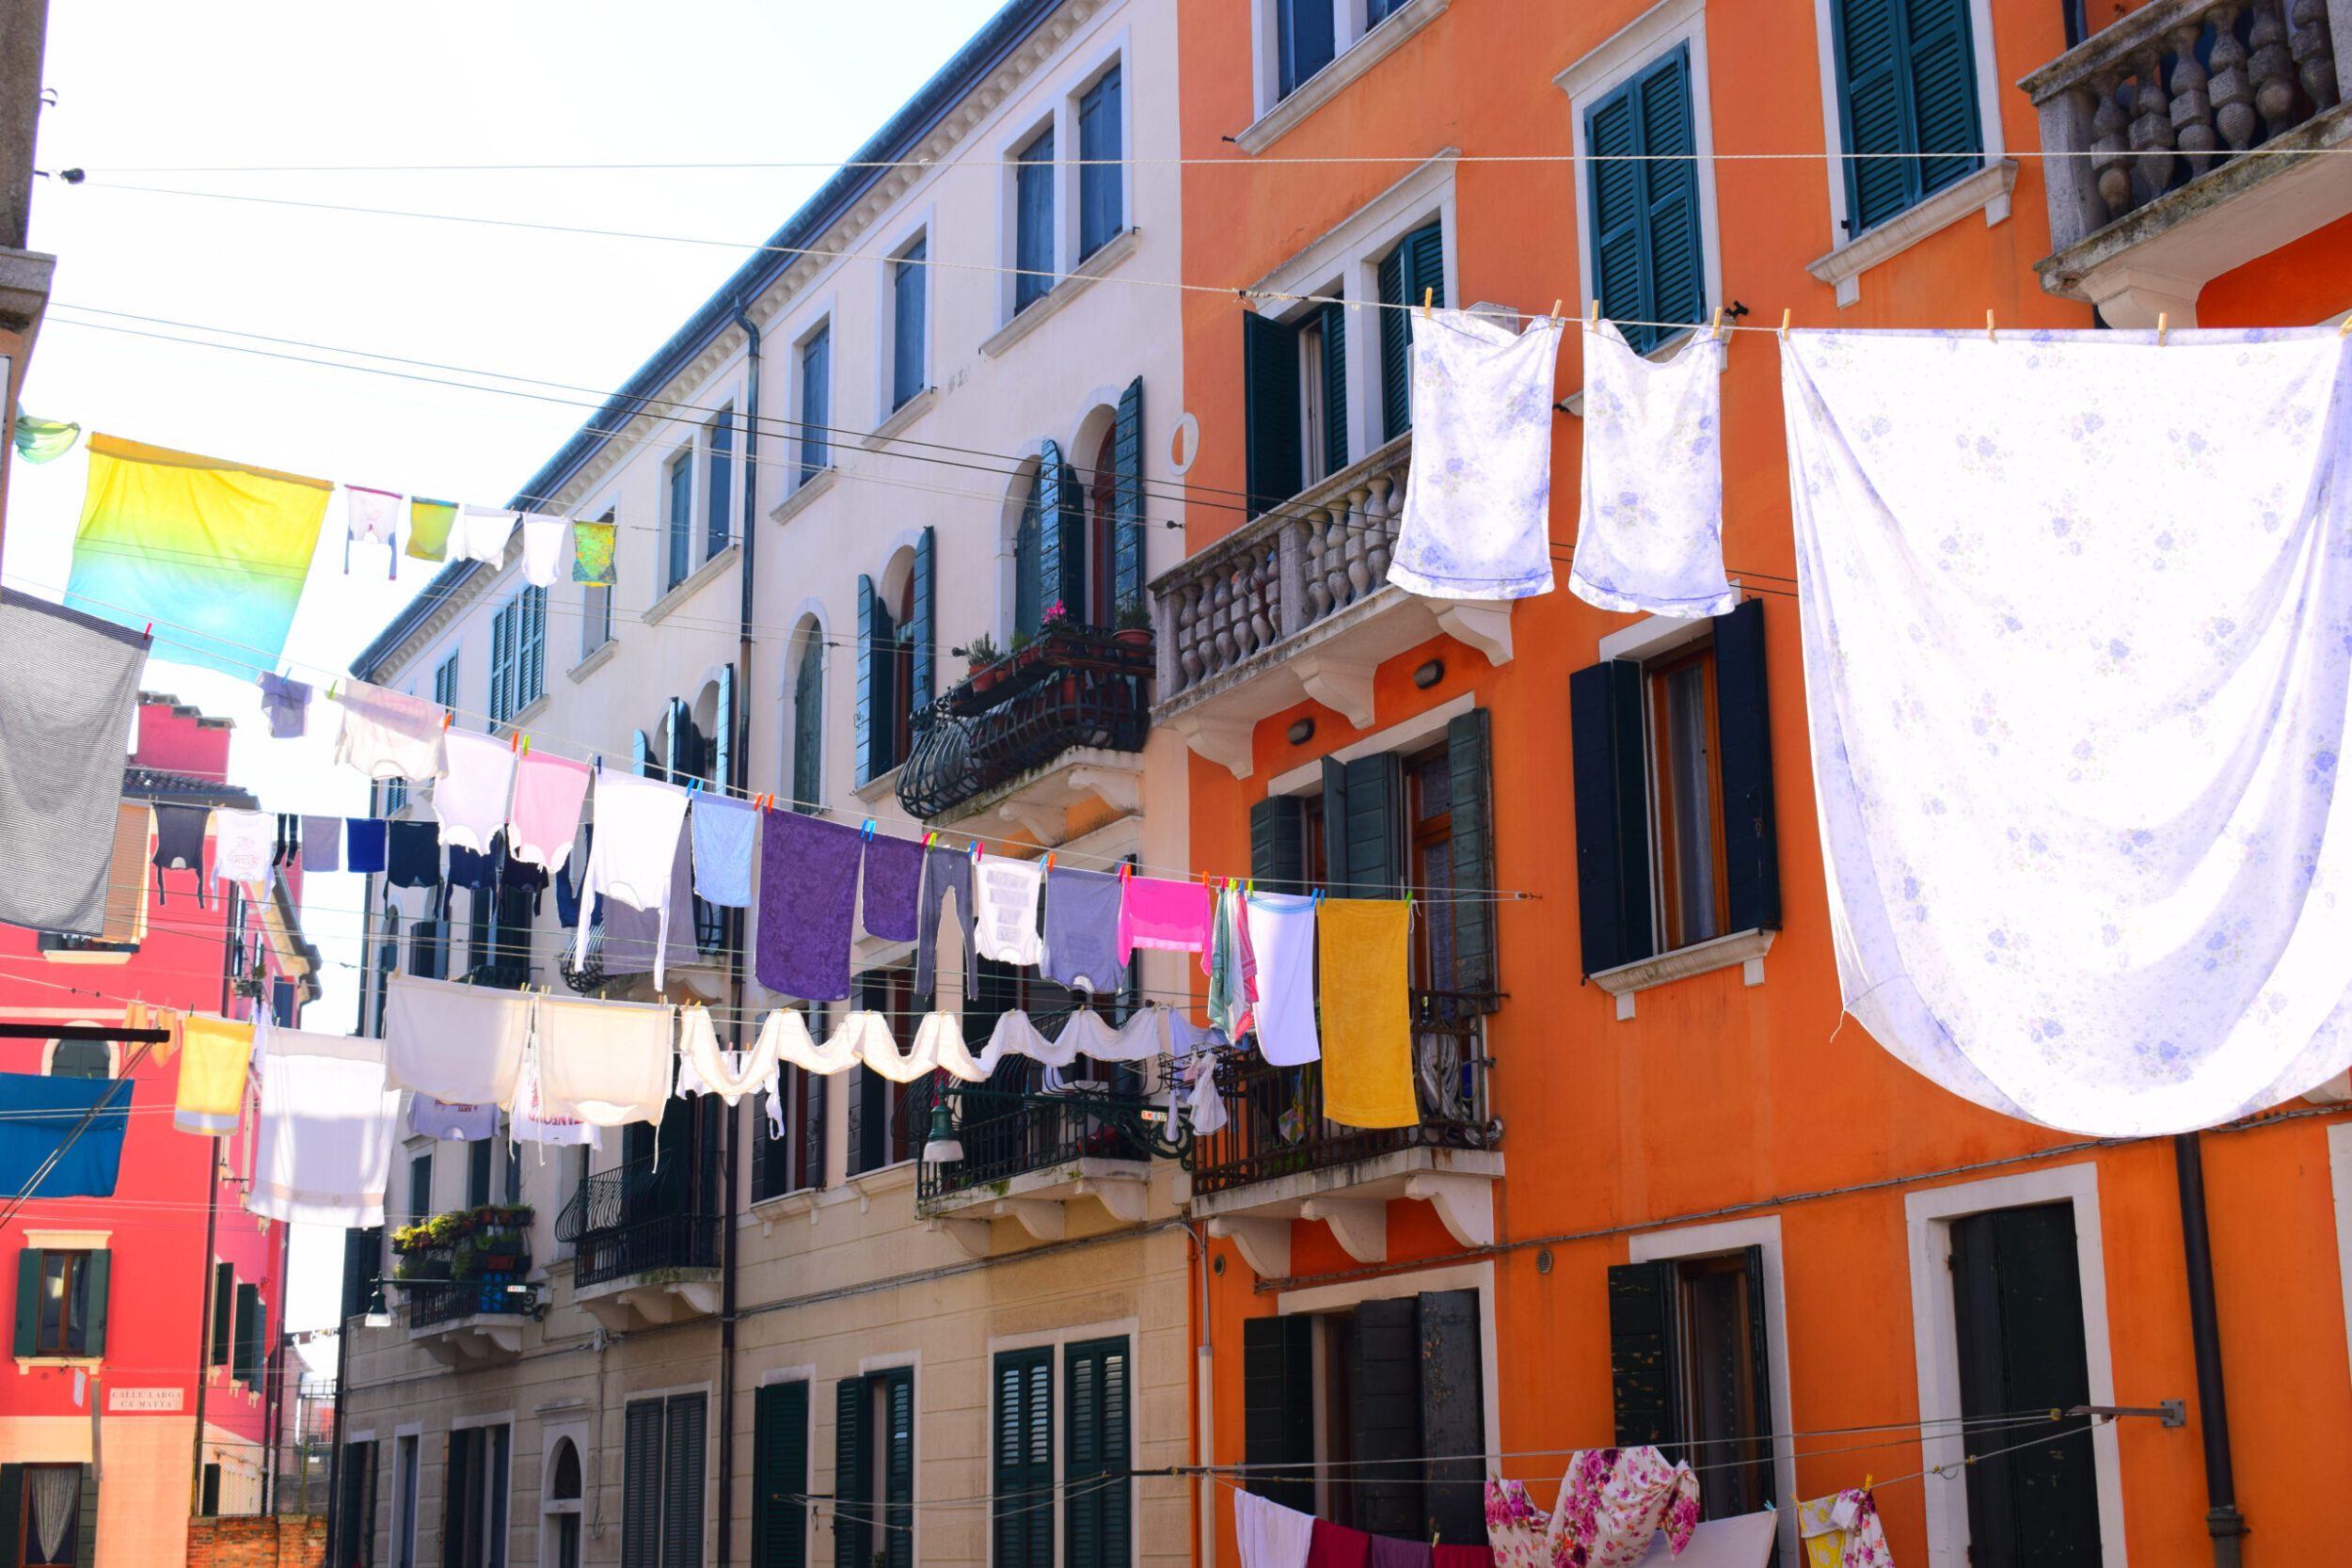 laundry in streets